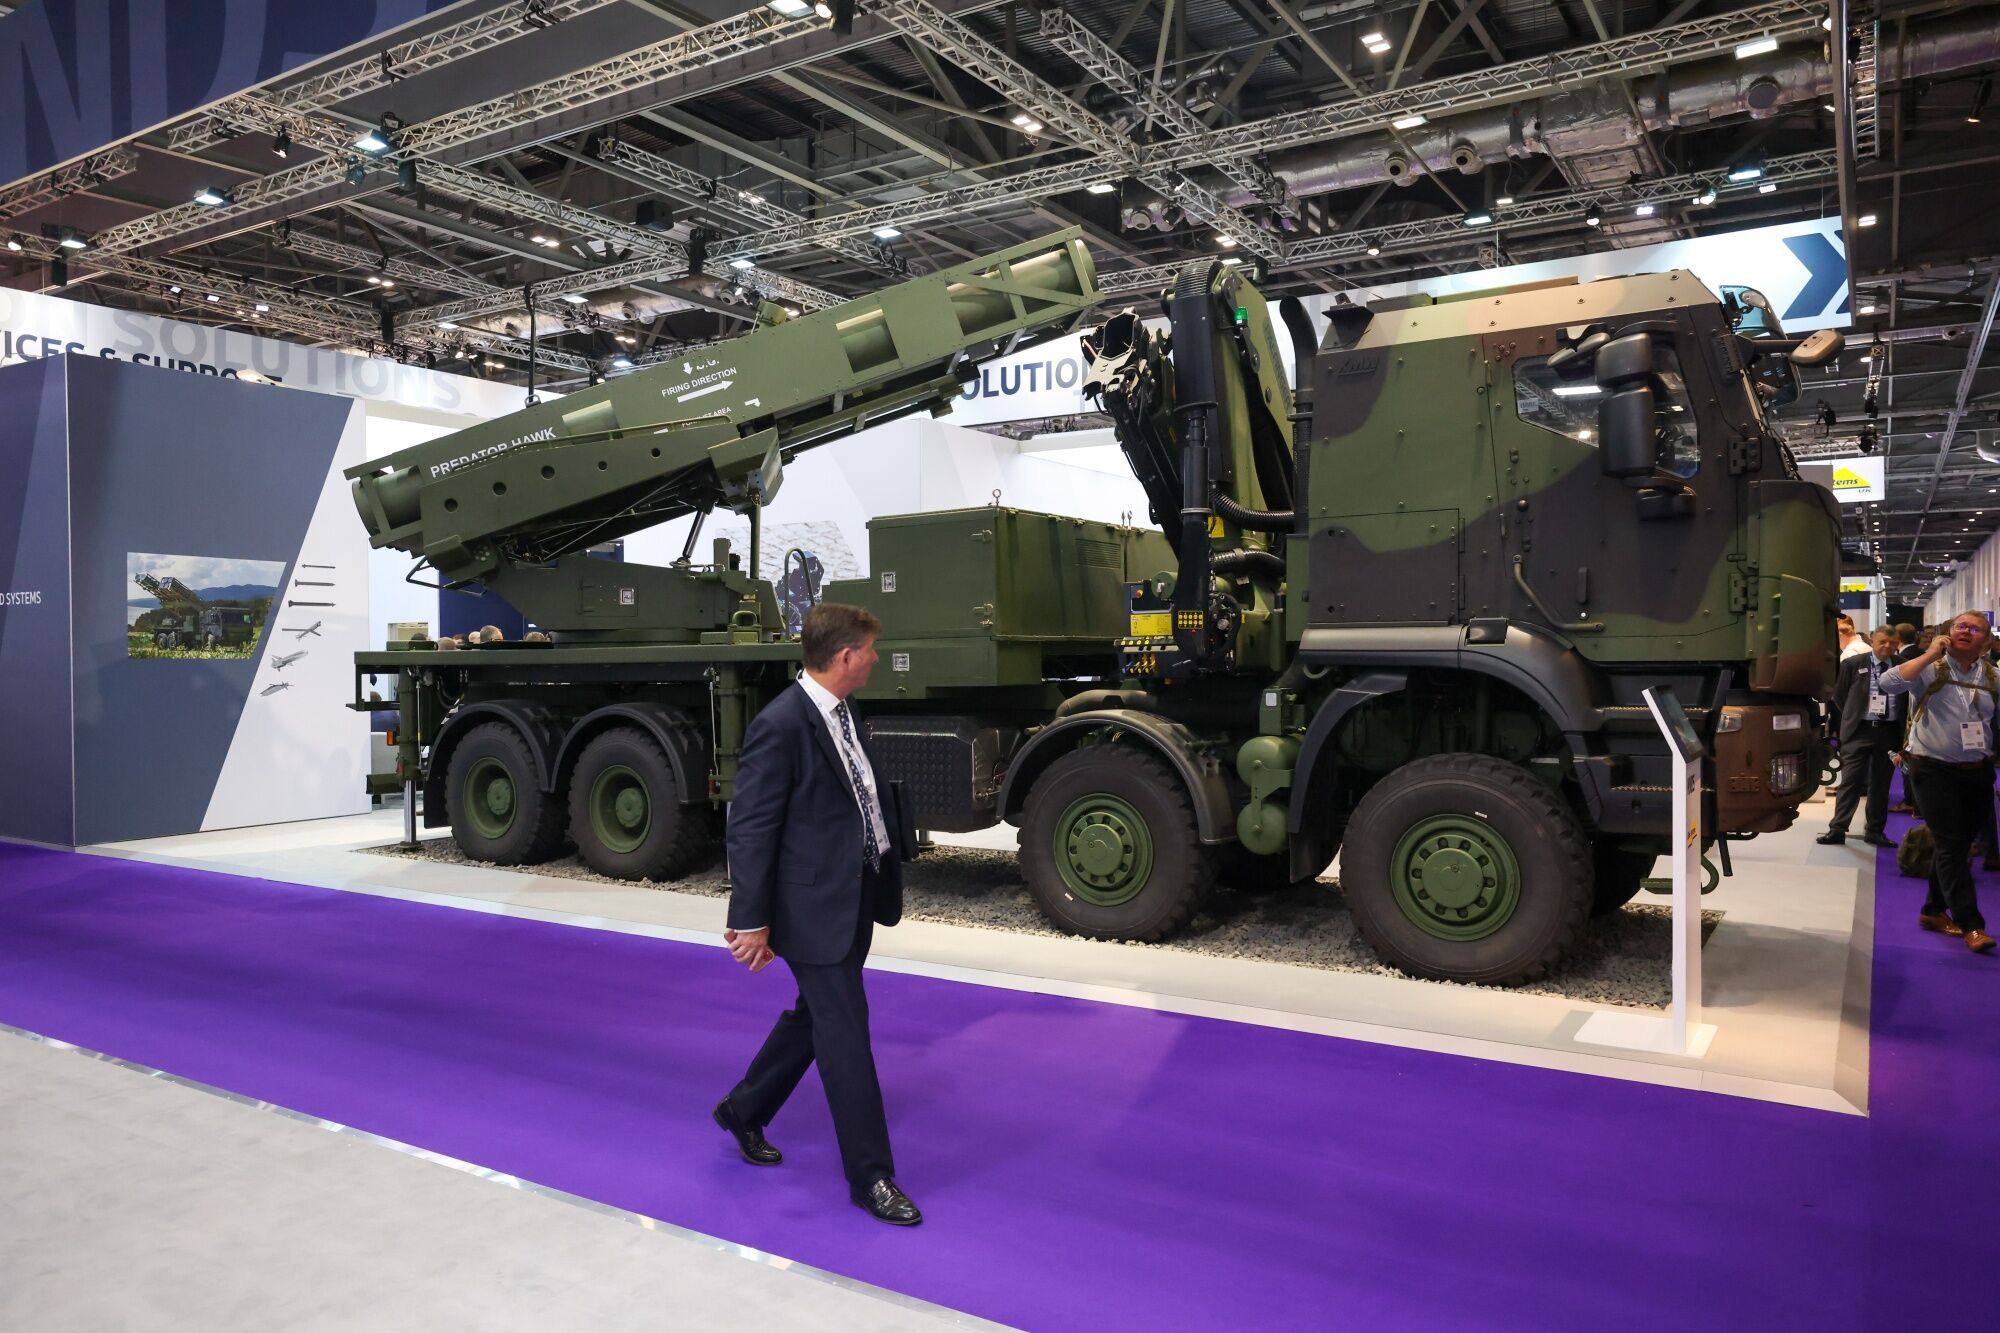 A Krauss-Maffei Wegmann EuroPULS MRL mounted on an Iveco Trakker 8X8 chassis on the opening day of the DSEI exhibition in London. Photo: Bloomberg